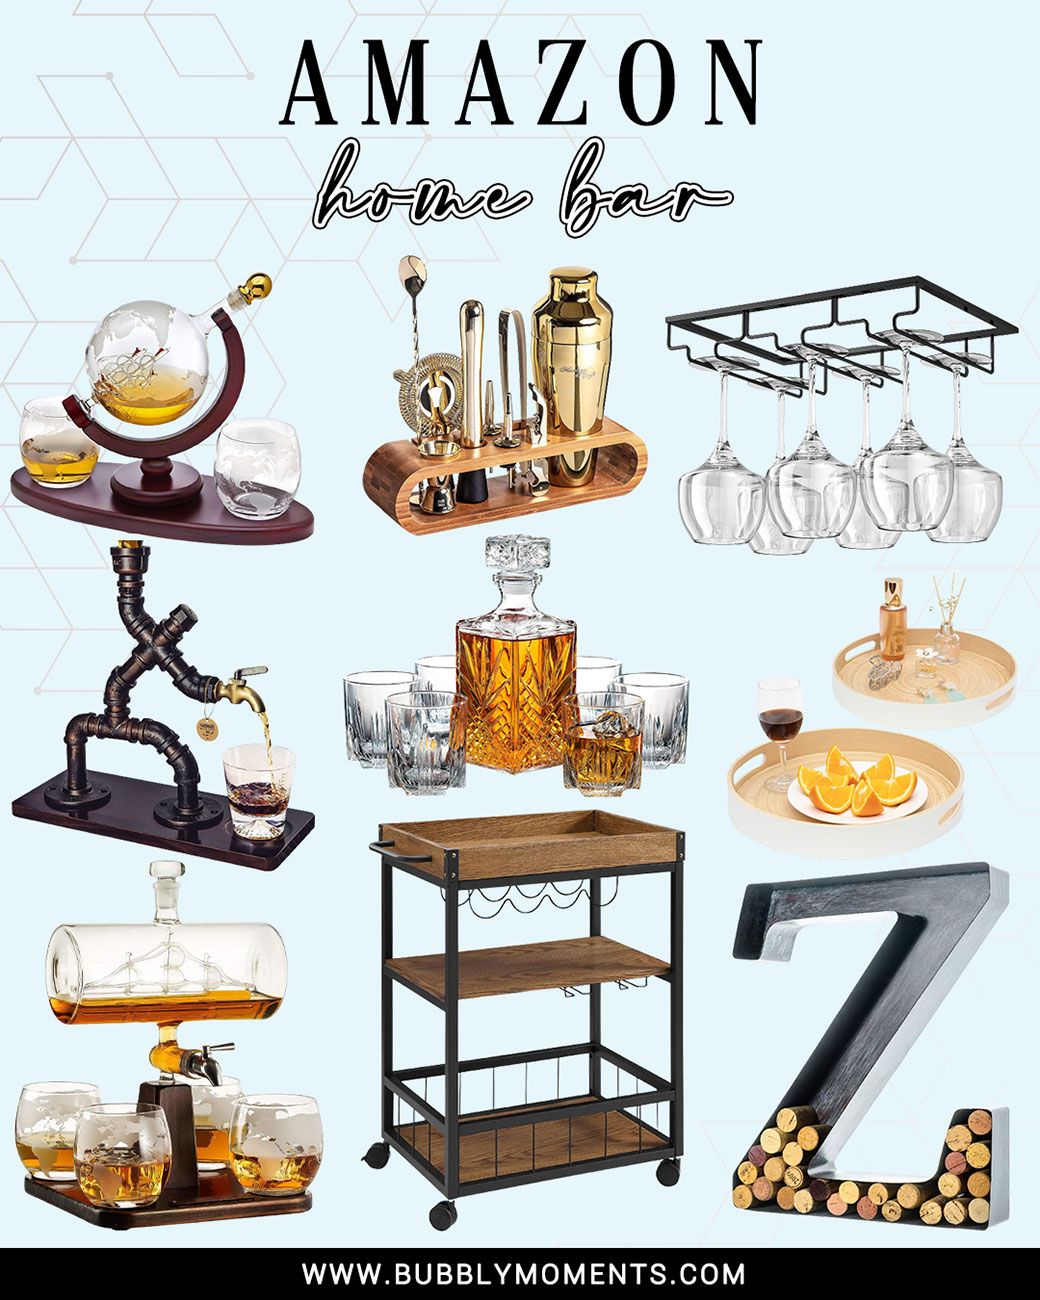 Home bar | Home bar accessories | Merch by Amazon | Stock the bar | Home bar ideas | Bar cart | Handcrafted Liquor Dispenser | Serving Trays | Wine Glass Holder| Bartender Kit | Cocktail Shaker Set | Bubbly Moments